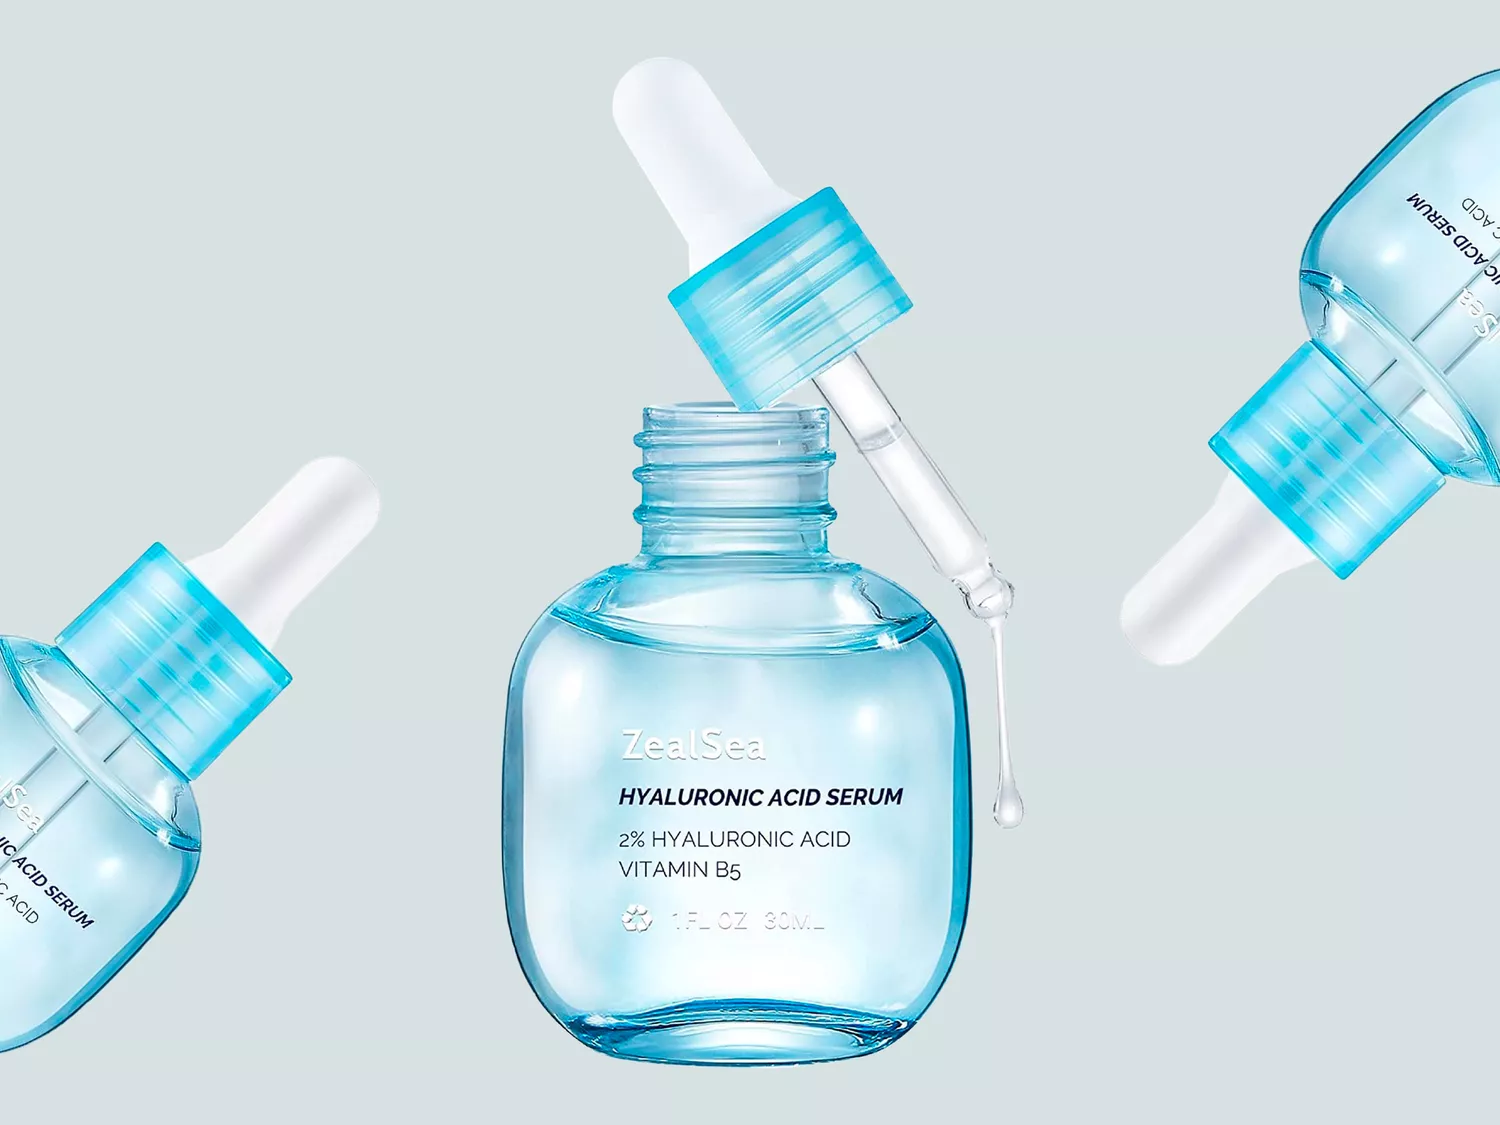 Shoppers Say This $10 Hyaluronic Acid Serum Is So Hydrating, It’s Like a “Tall Glass of Water” for Skin